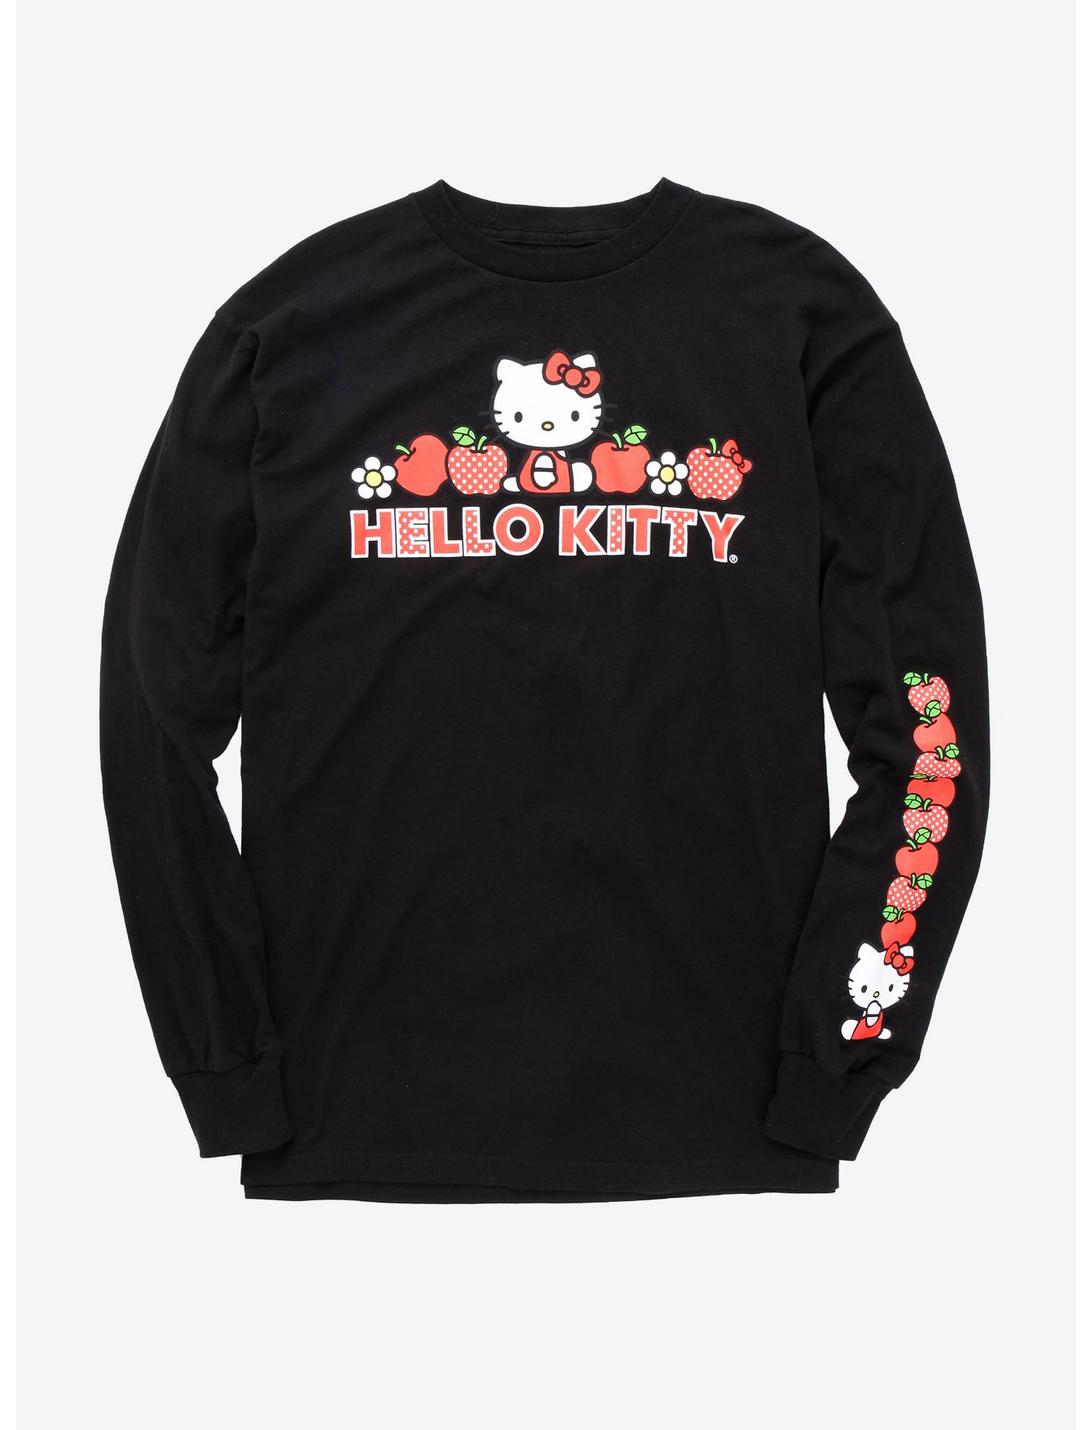 Sanrio Hello Kitty with Apples Long Sleeve Women's T-Shirt - BoxLunch Exclusive, BLACK, hi-res